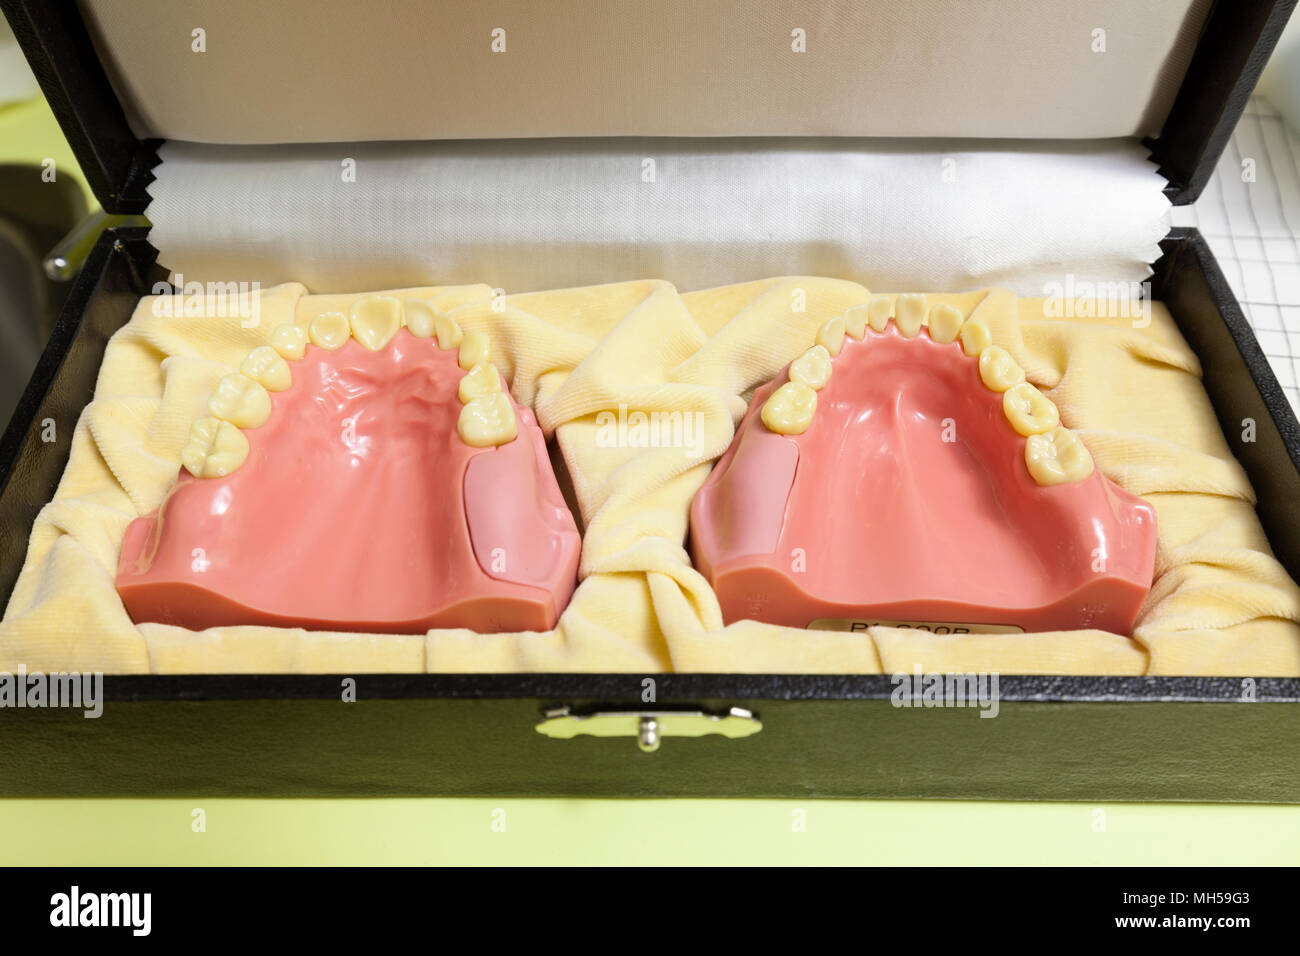 A dental model of the human mouth and teeth. Stock Photo